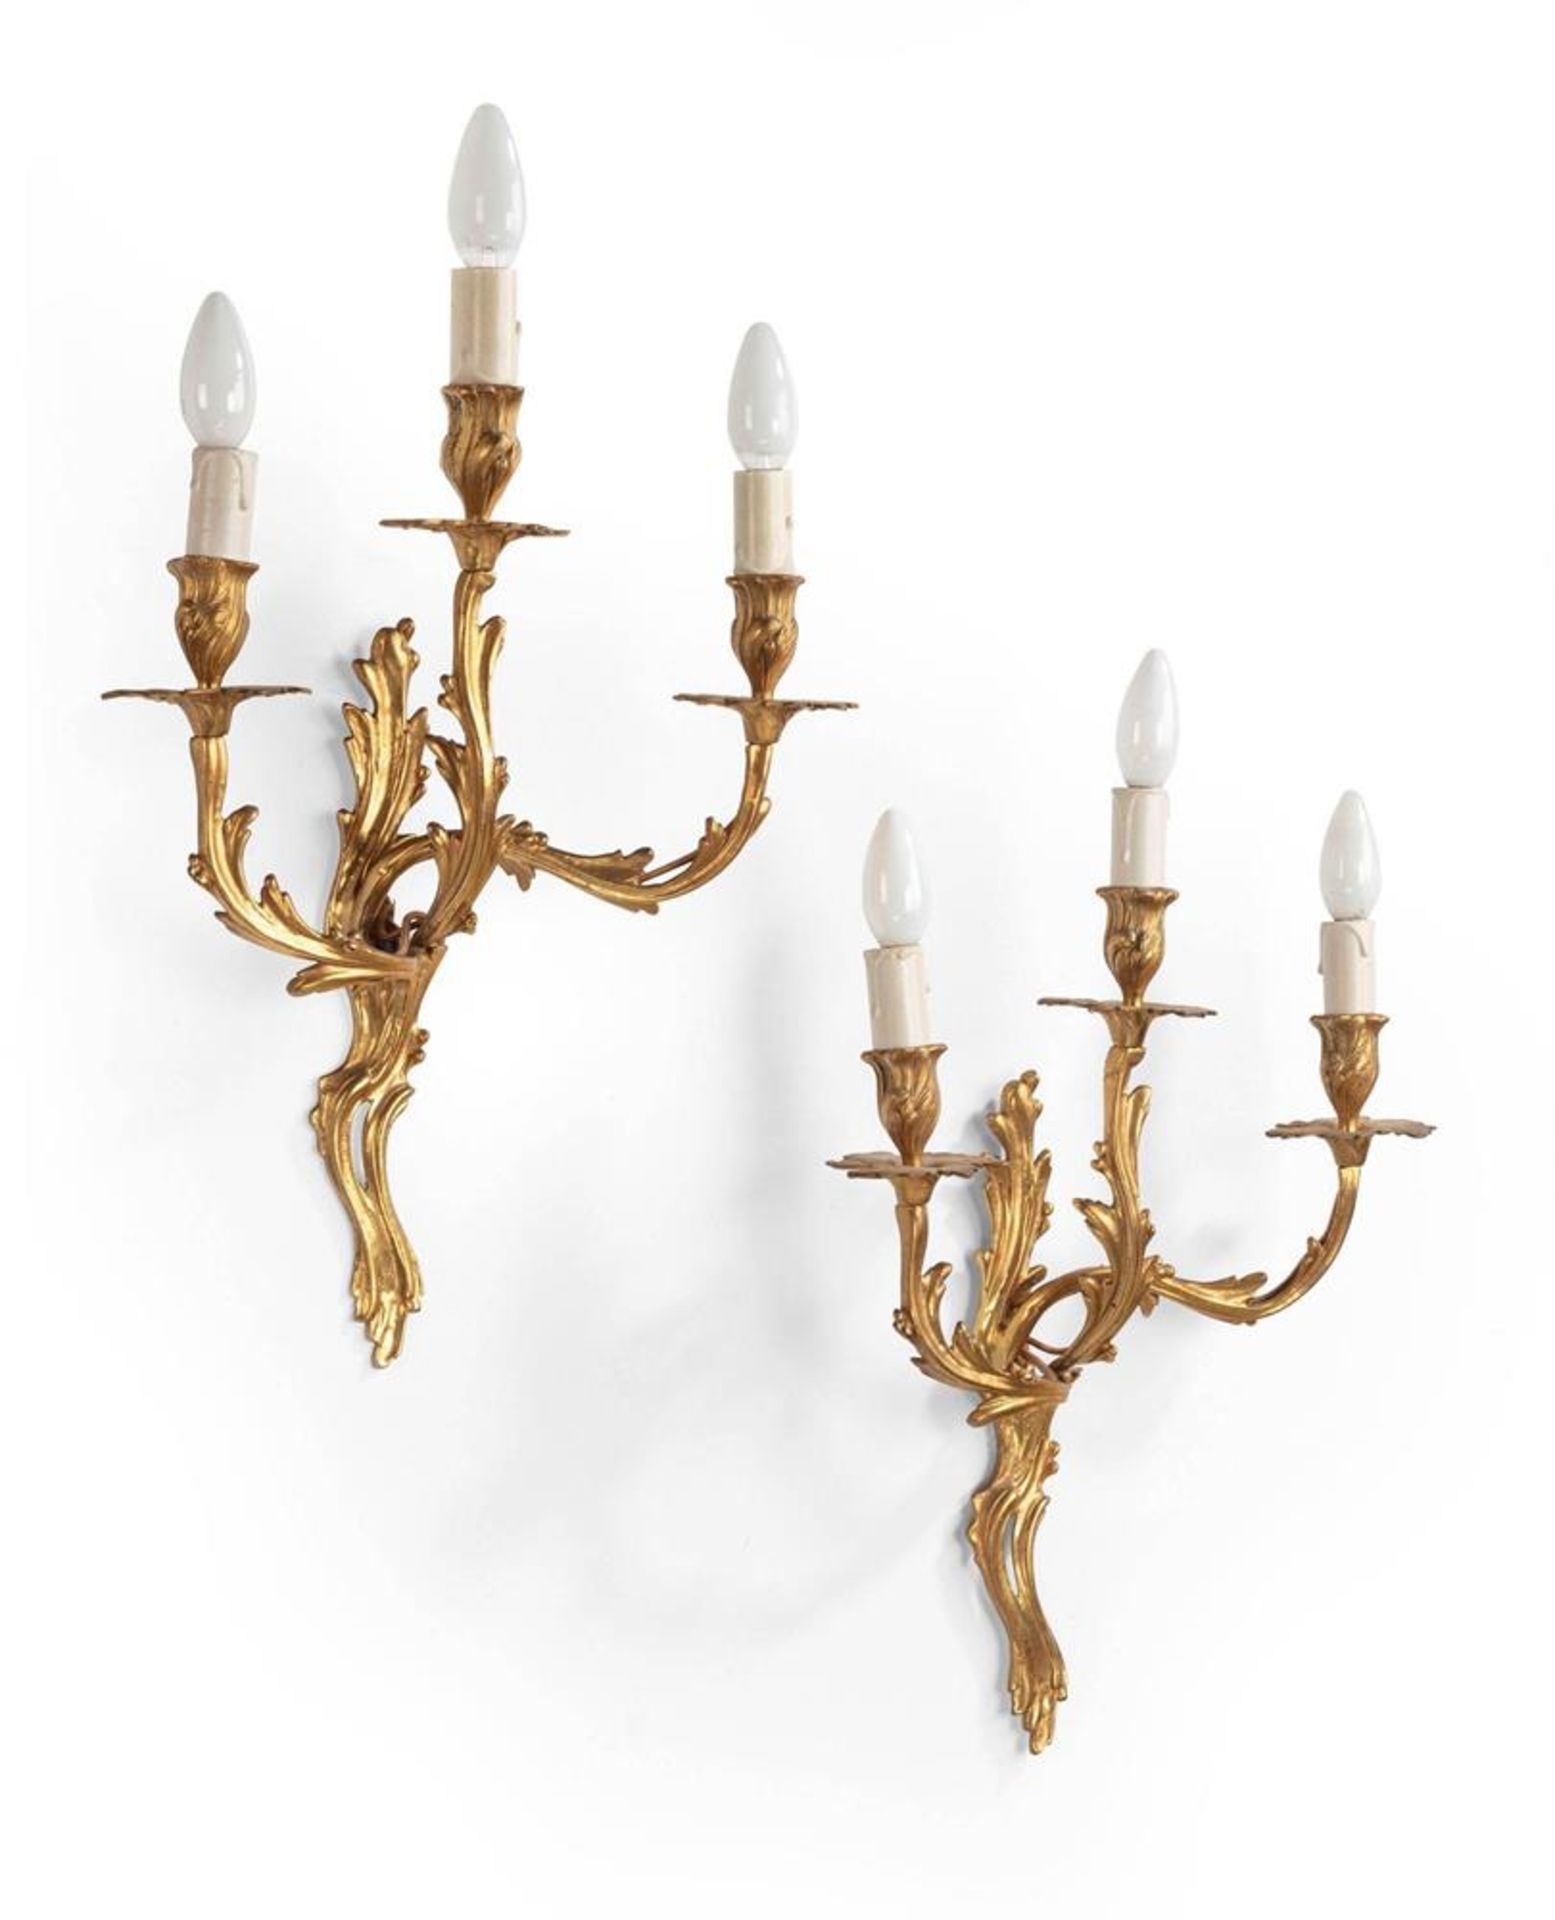 A PAIR OF ORMOLU WALL LIGHTS IN ROCOCO STYLE